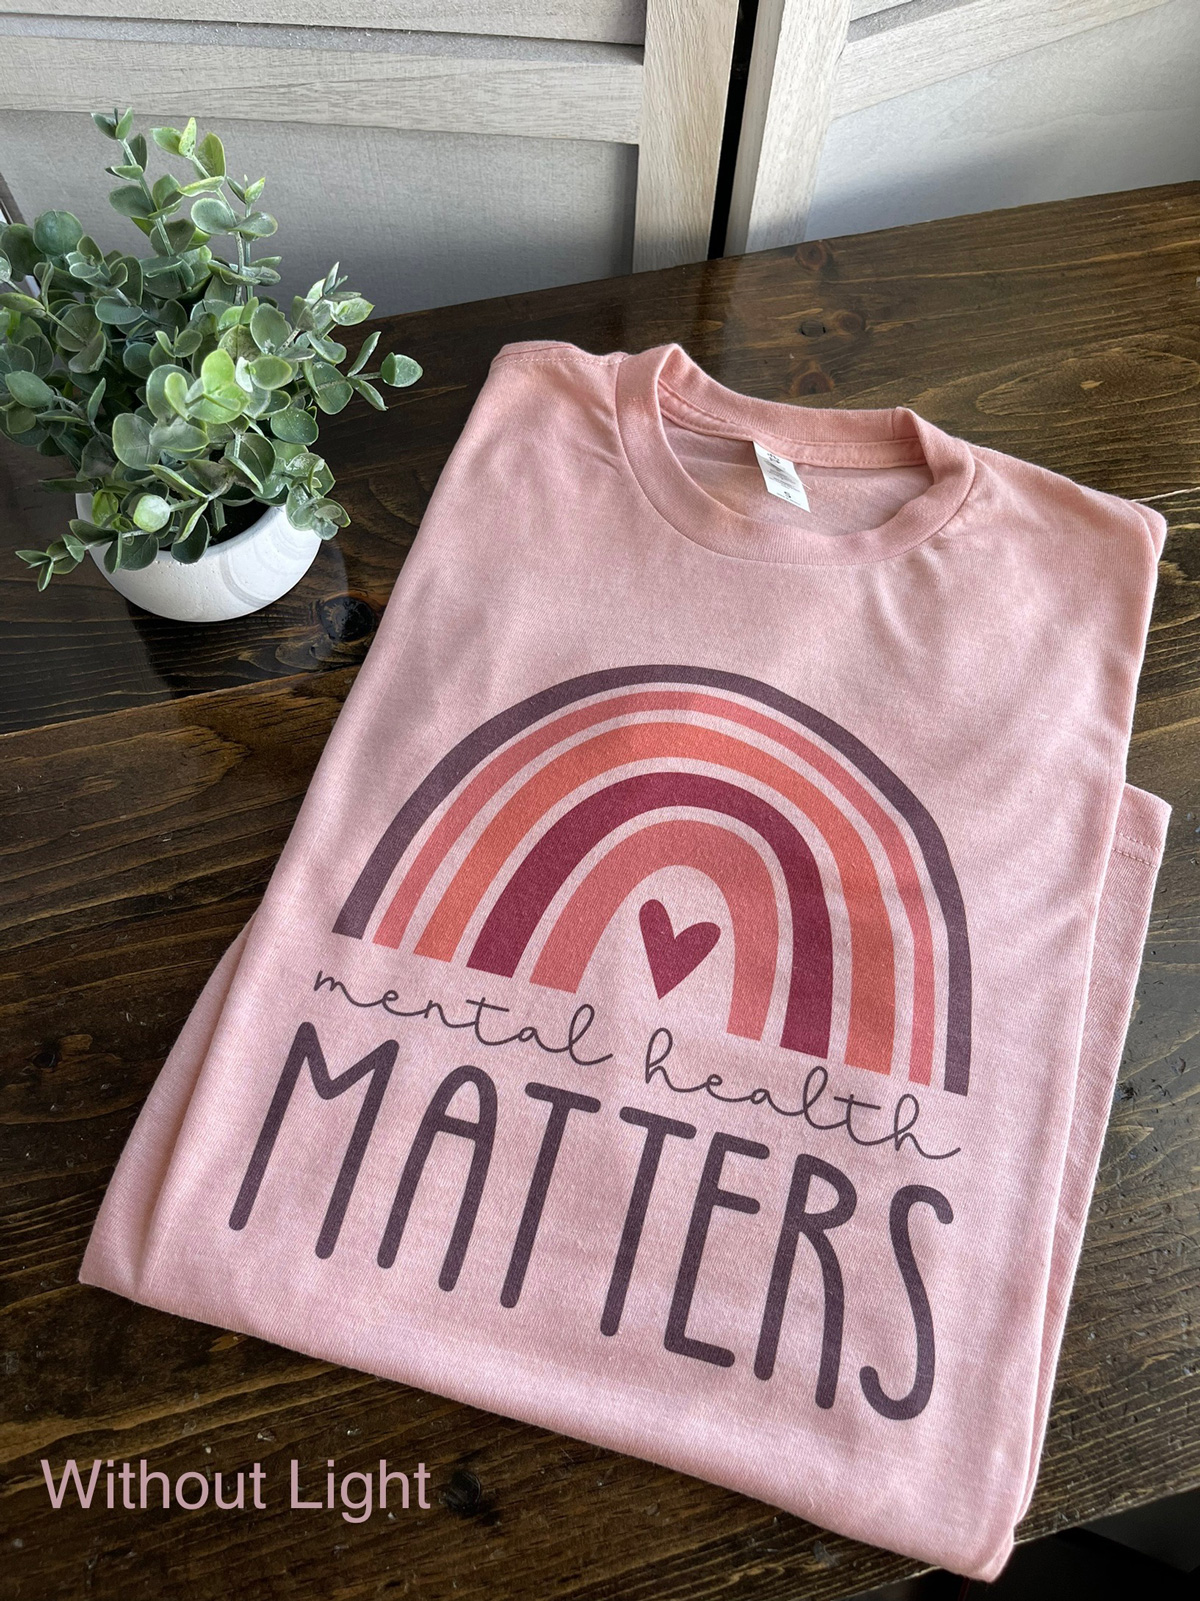 5 tips for creating shirts that sell – Cricut